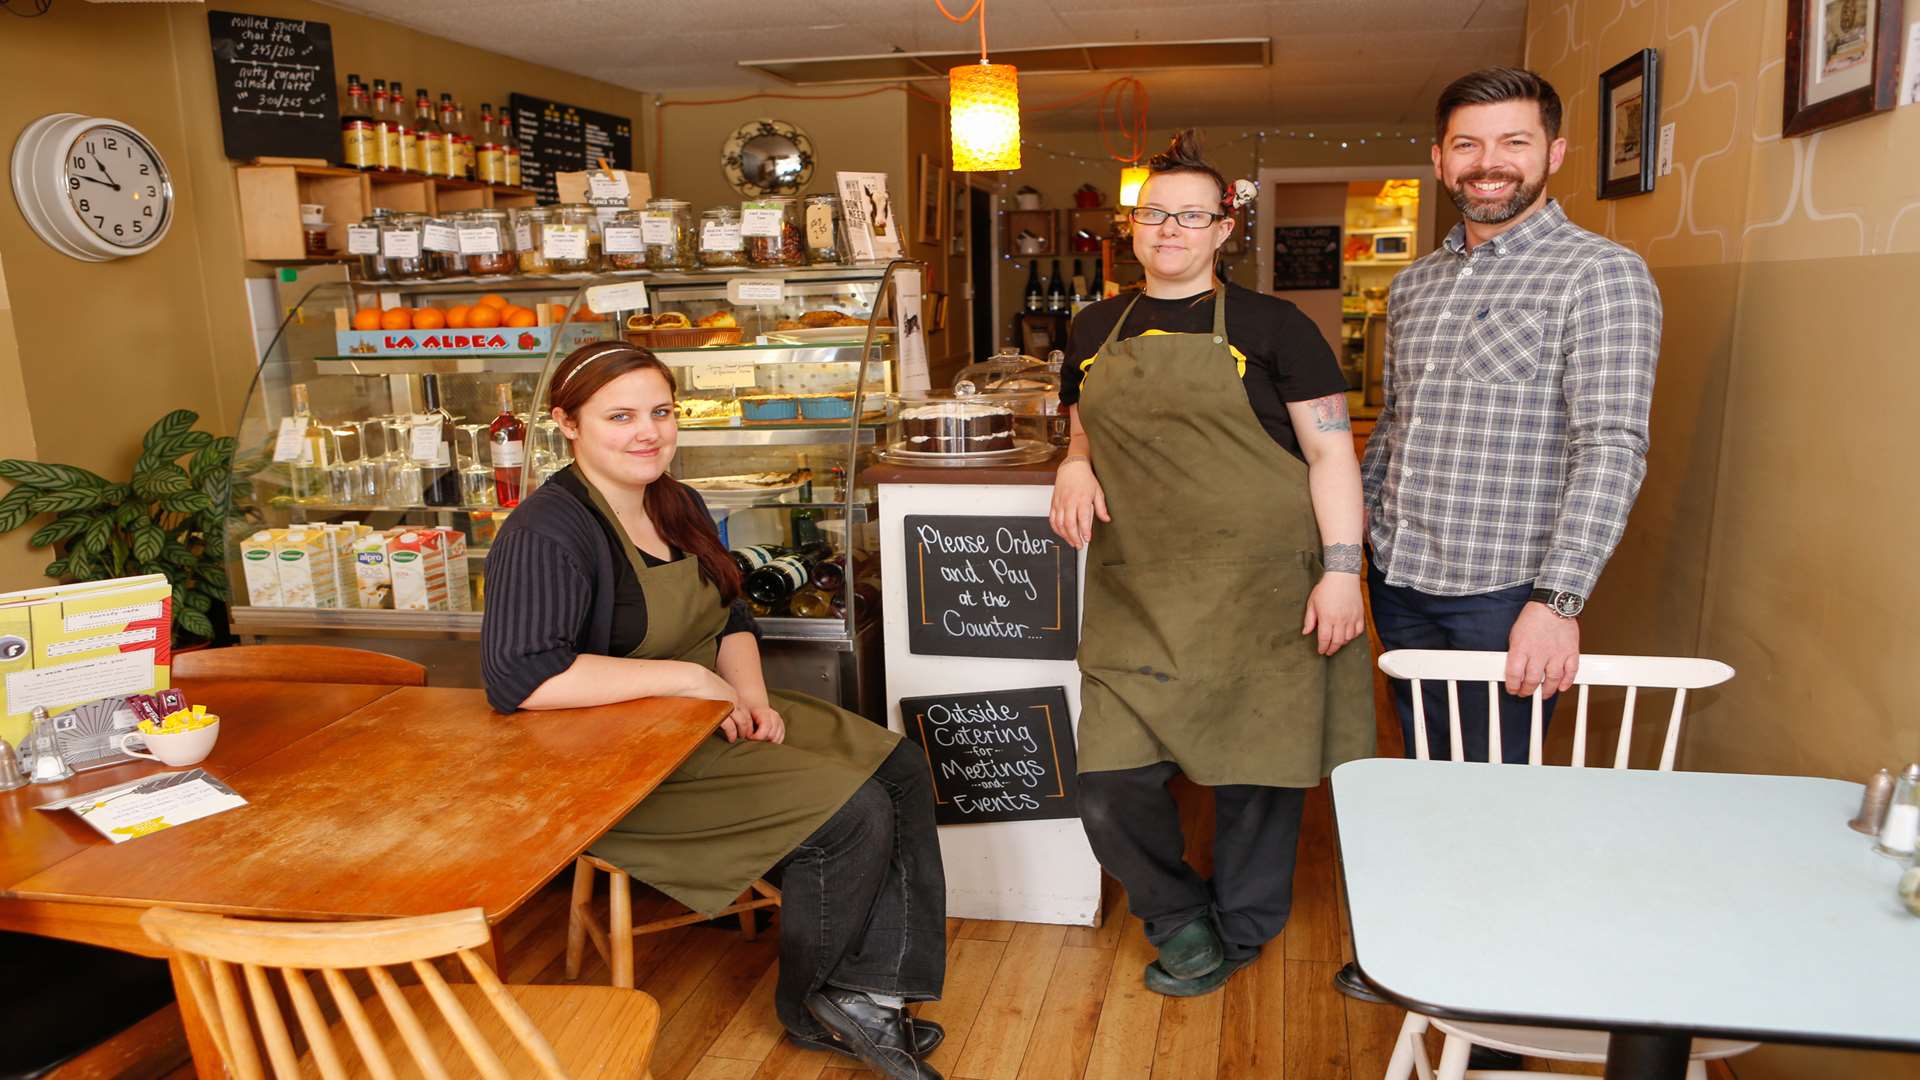 Nora Gyenesne Gangee, Steph Hinton and James Hooper from the Fortify Cafe